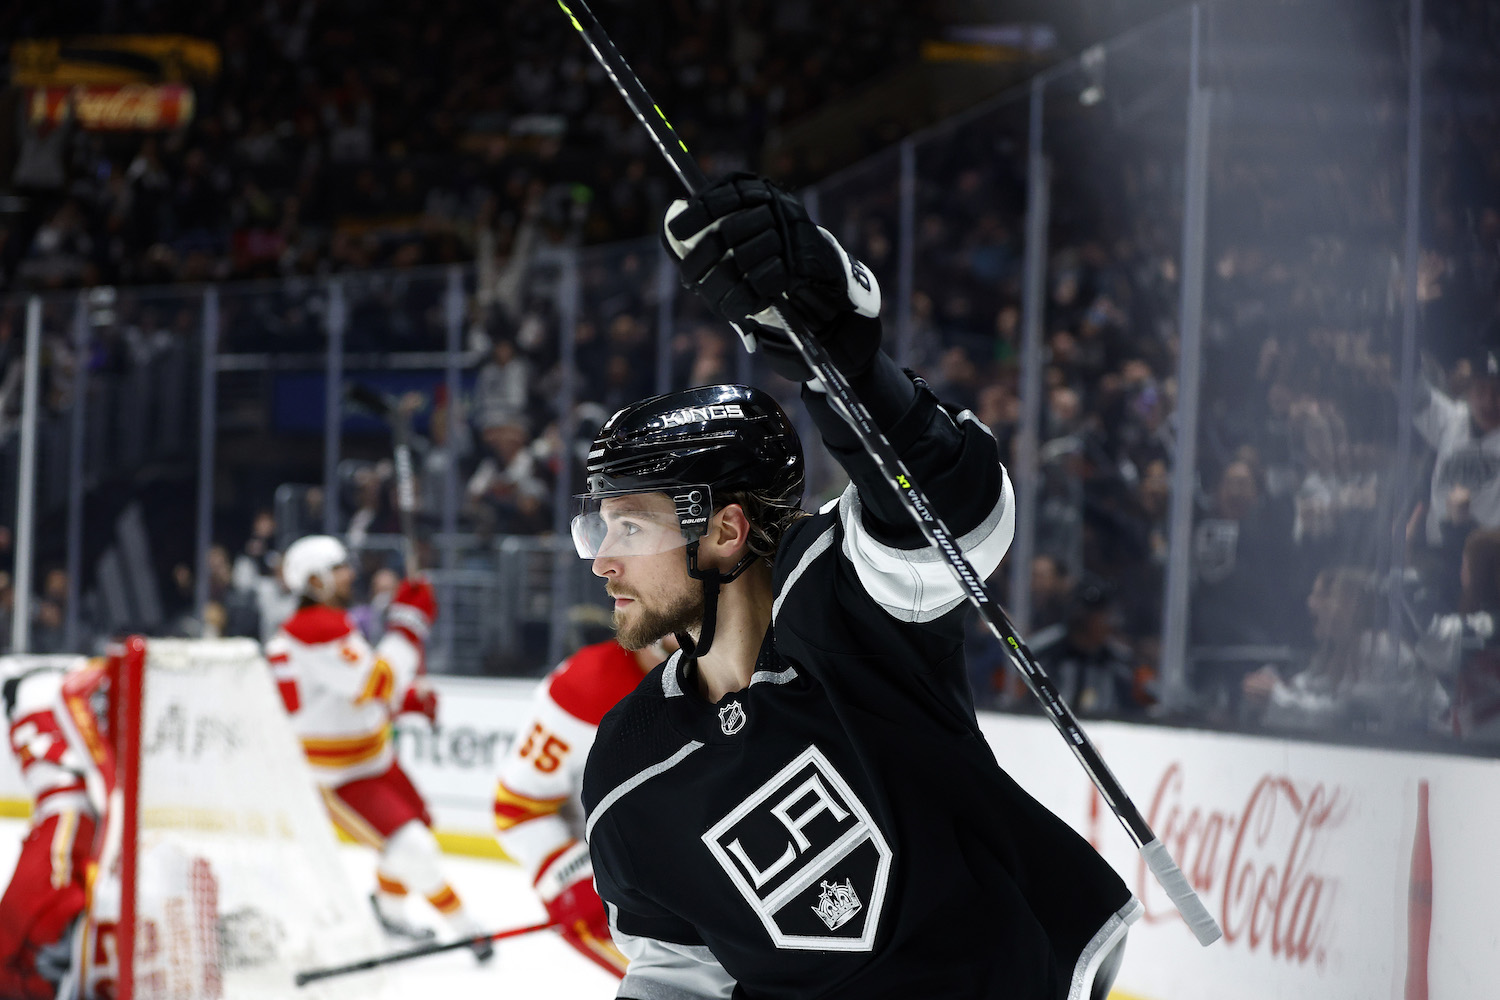 LOS ANGELES, CALIFORNIA - MARCH 20: Adrian Kempe #9 of the Los Angeles Kings celebrates a goal against the Calgary Flames in the second period at Crypto.com Arena on March 20, 2023 in Los Angeles, California. (Photo by Ronald Martinez/Getty Images)